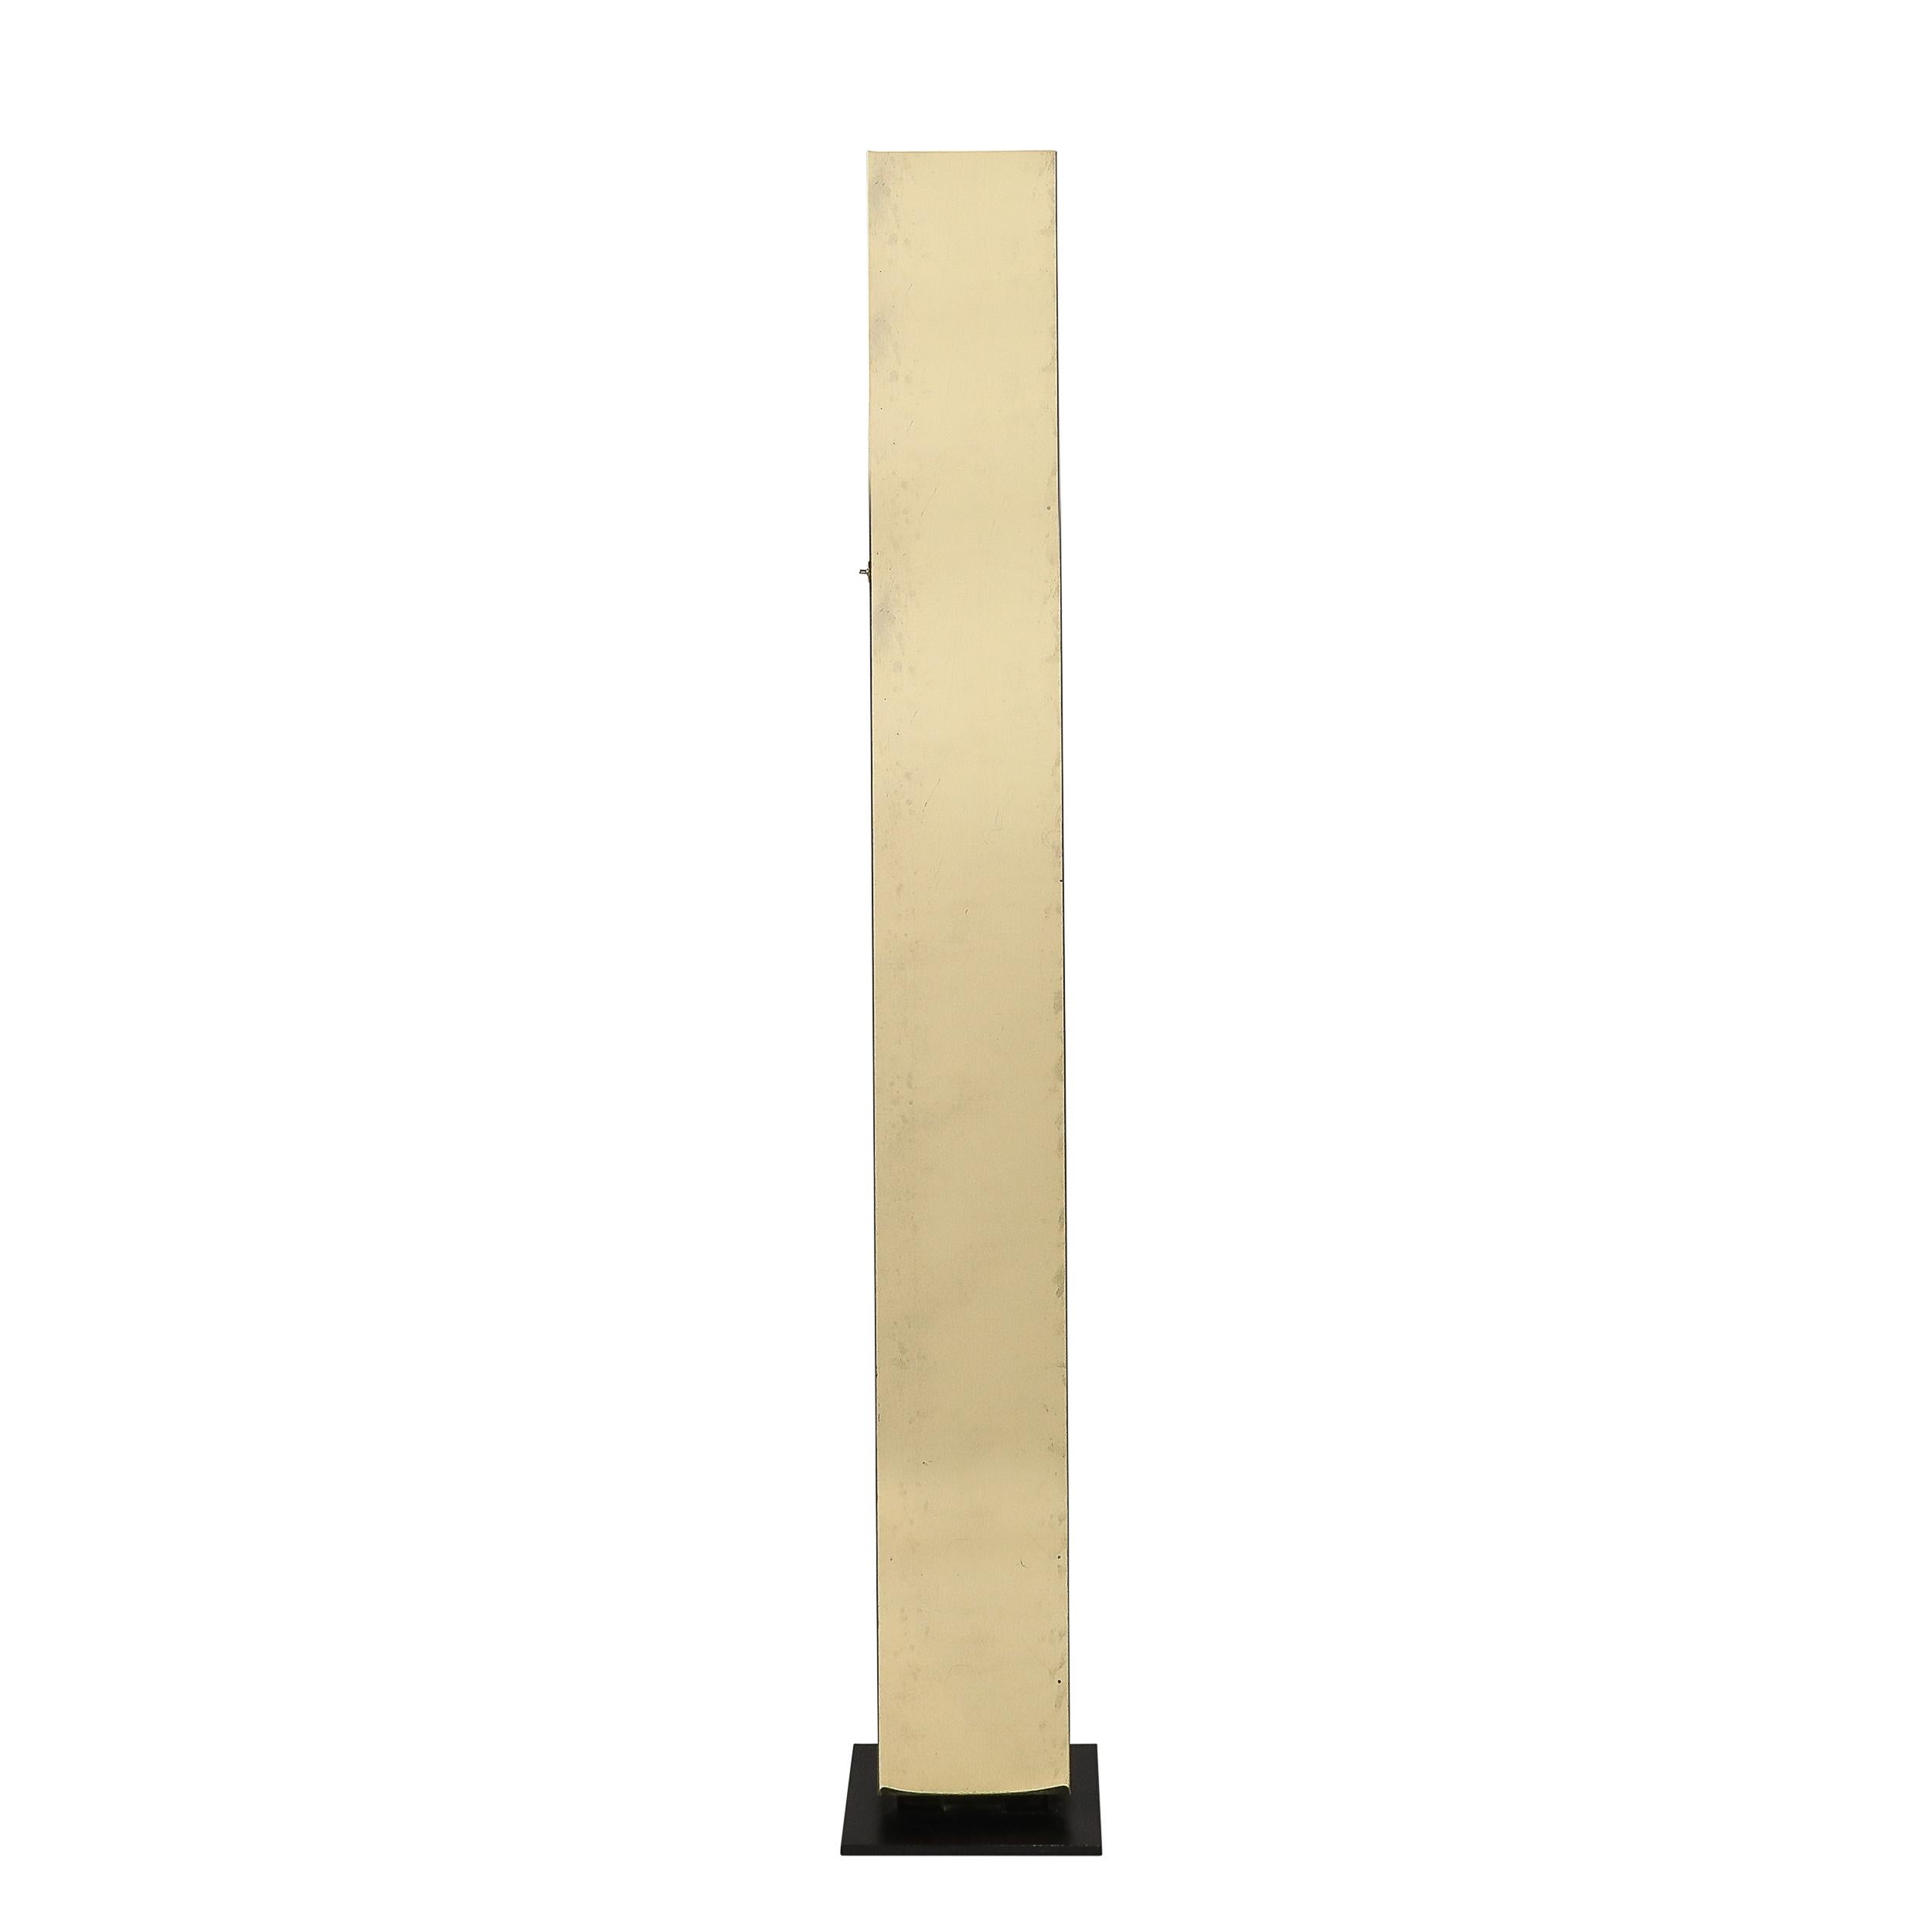 This striking and well proportioned Mid-Century Modernist Rectilinear Floor Lamp in Brass & Black Enamel originates from Italy, Circa 1970. Features a vertical profile resting on a low profile rectilinear black enamel base, with a towering body in